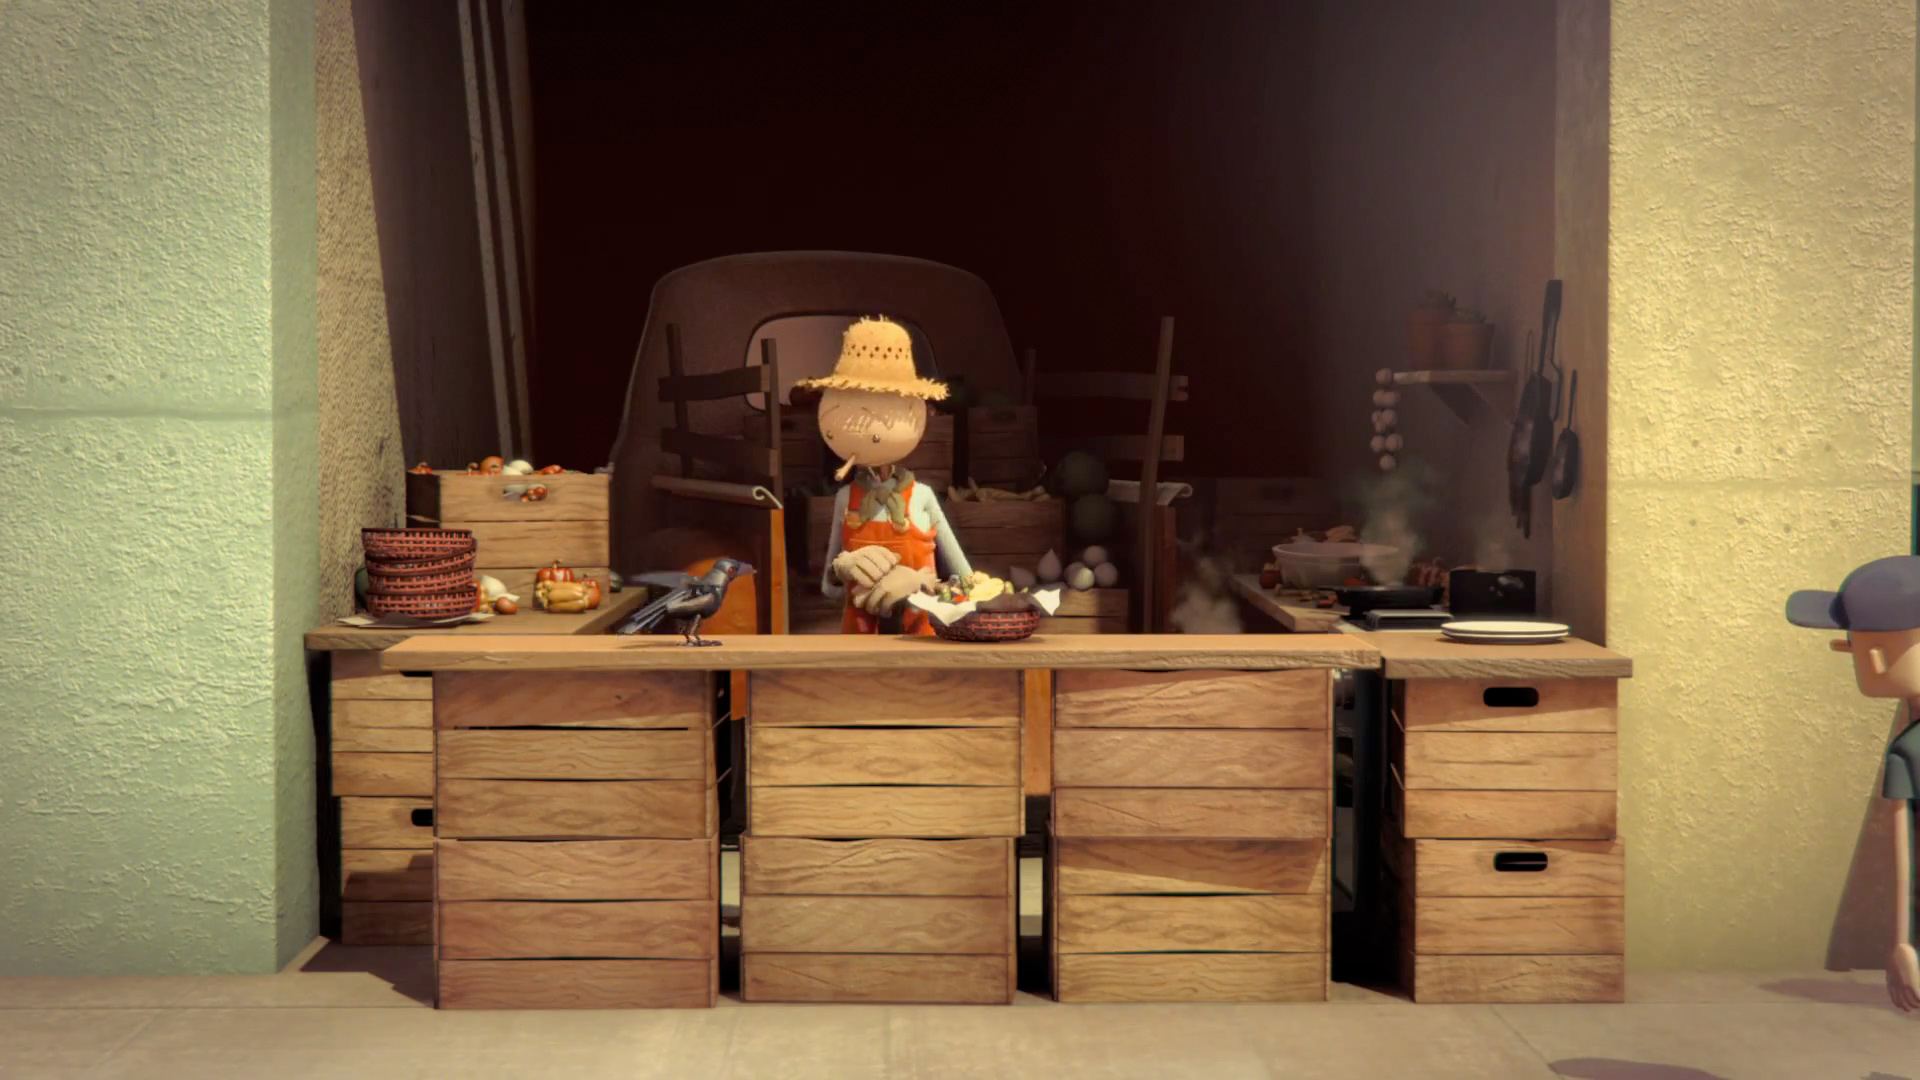 chipotle-creates-great-animated-short-film-the-scarecrow-24.jpg